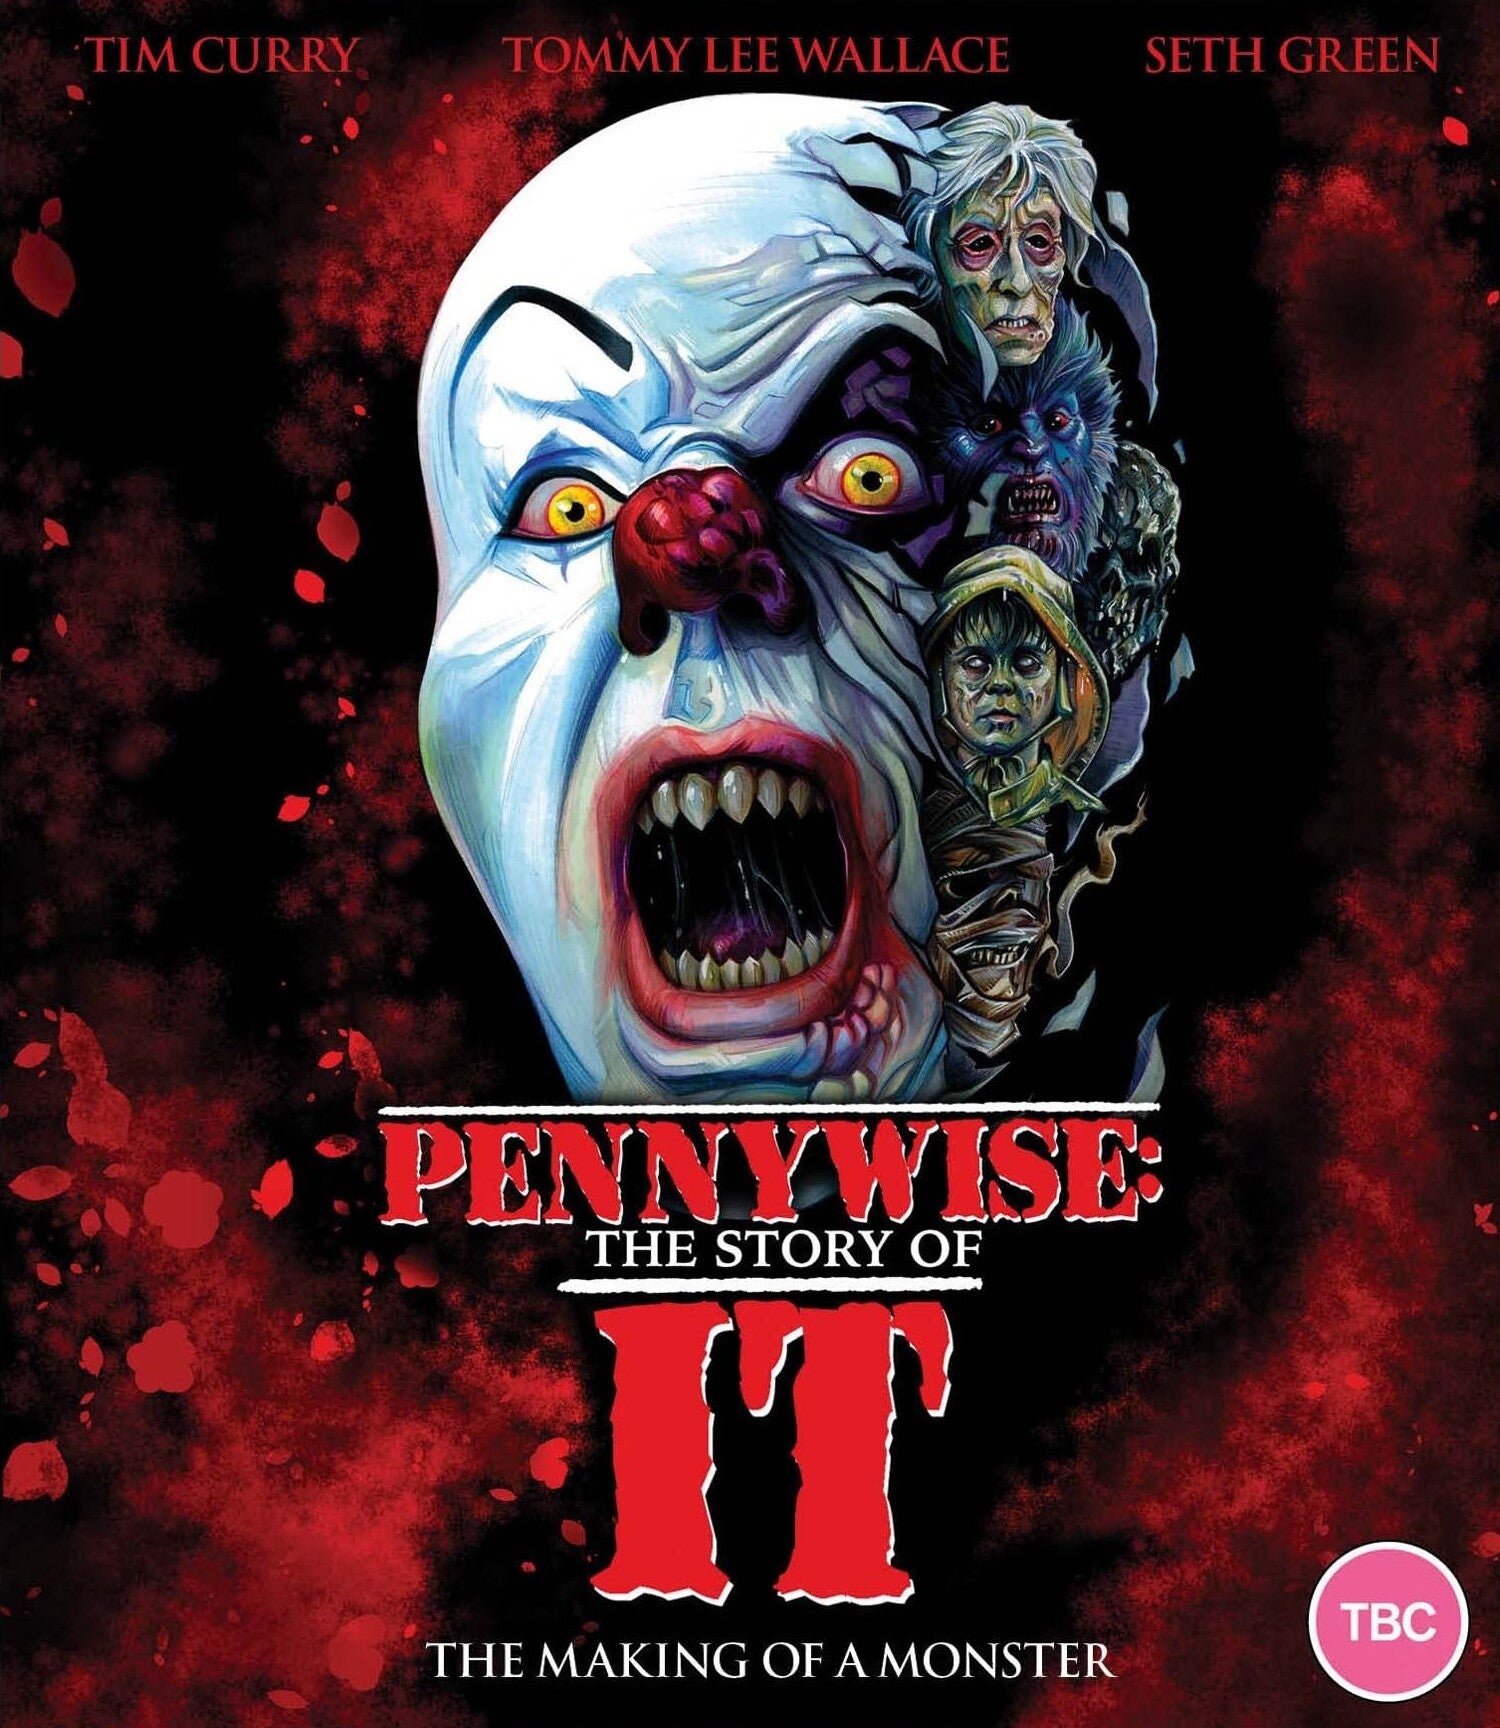 PENNYWISE: THE STORY OF IT (REGION B IMPORT) BLU-RAY